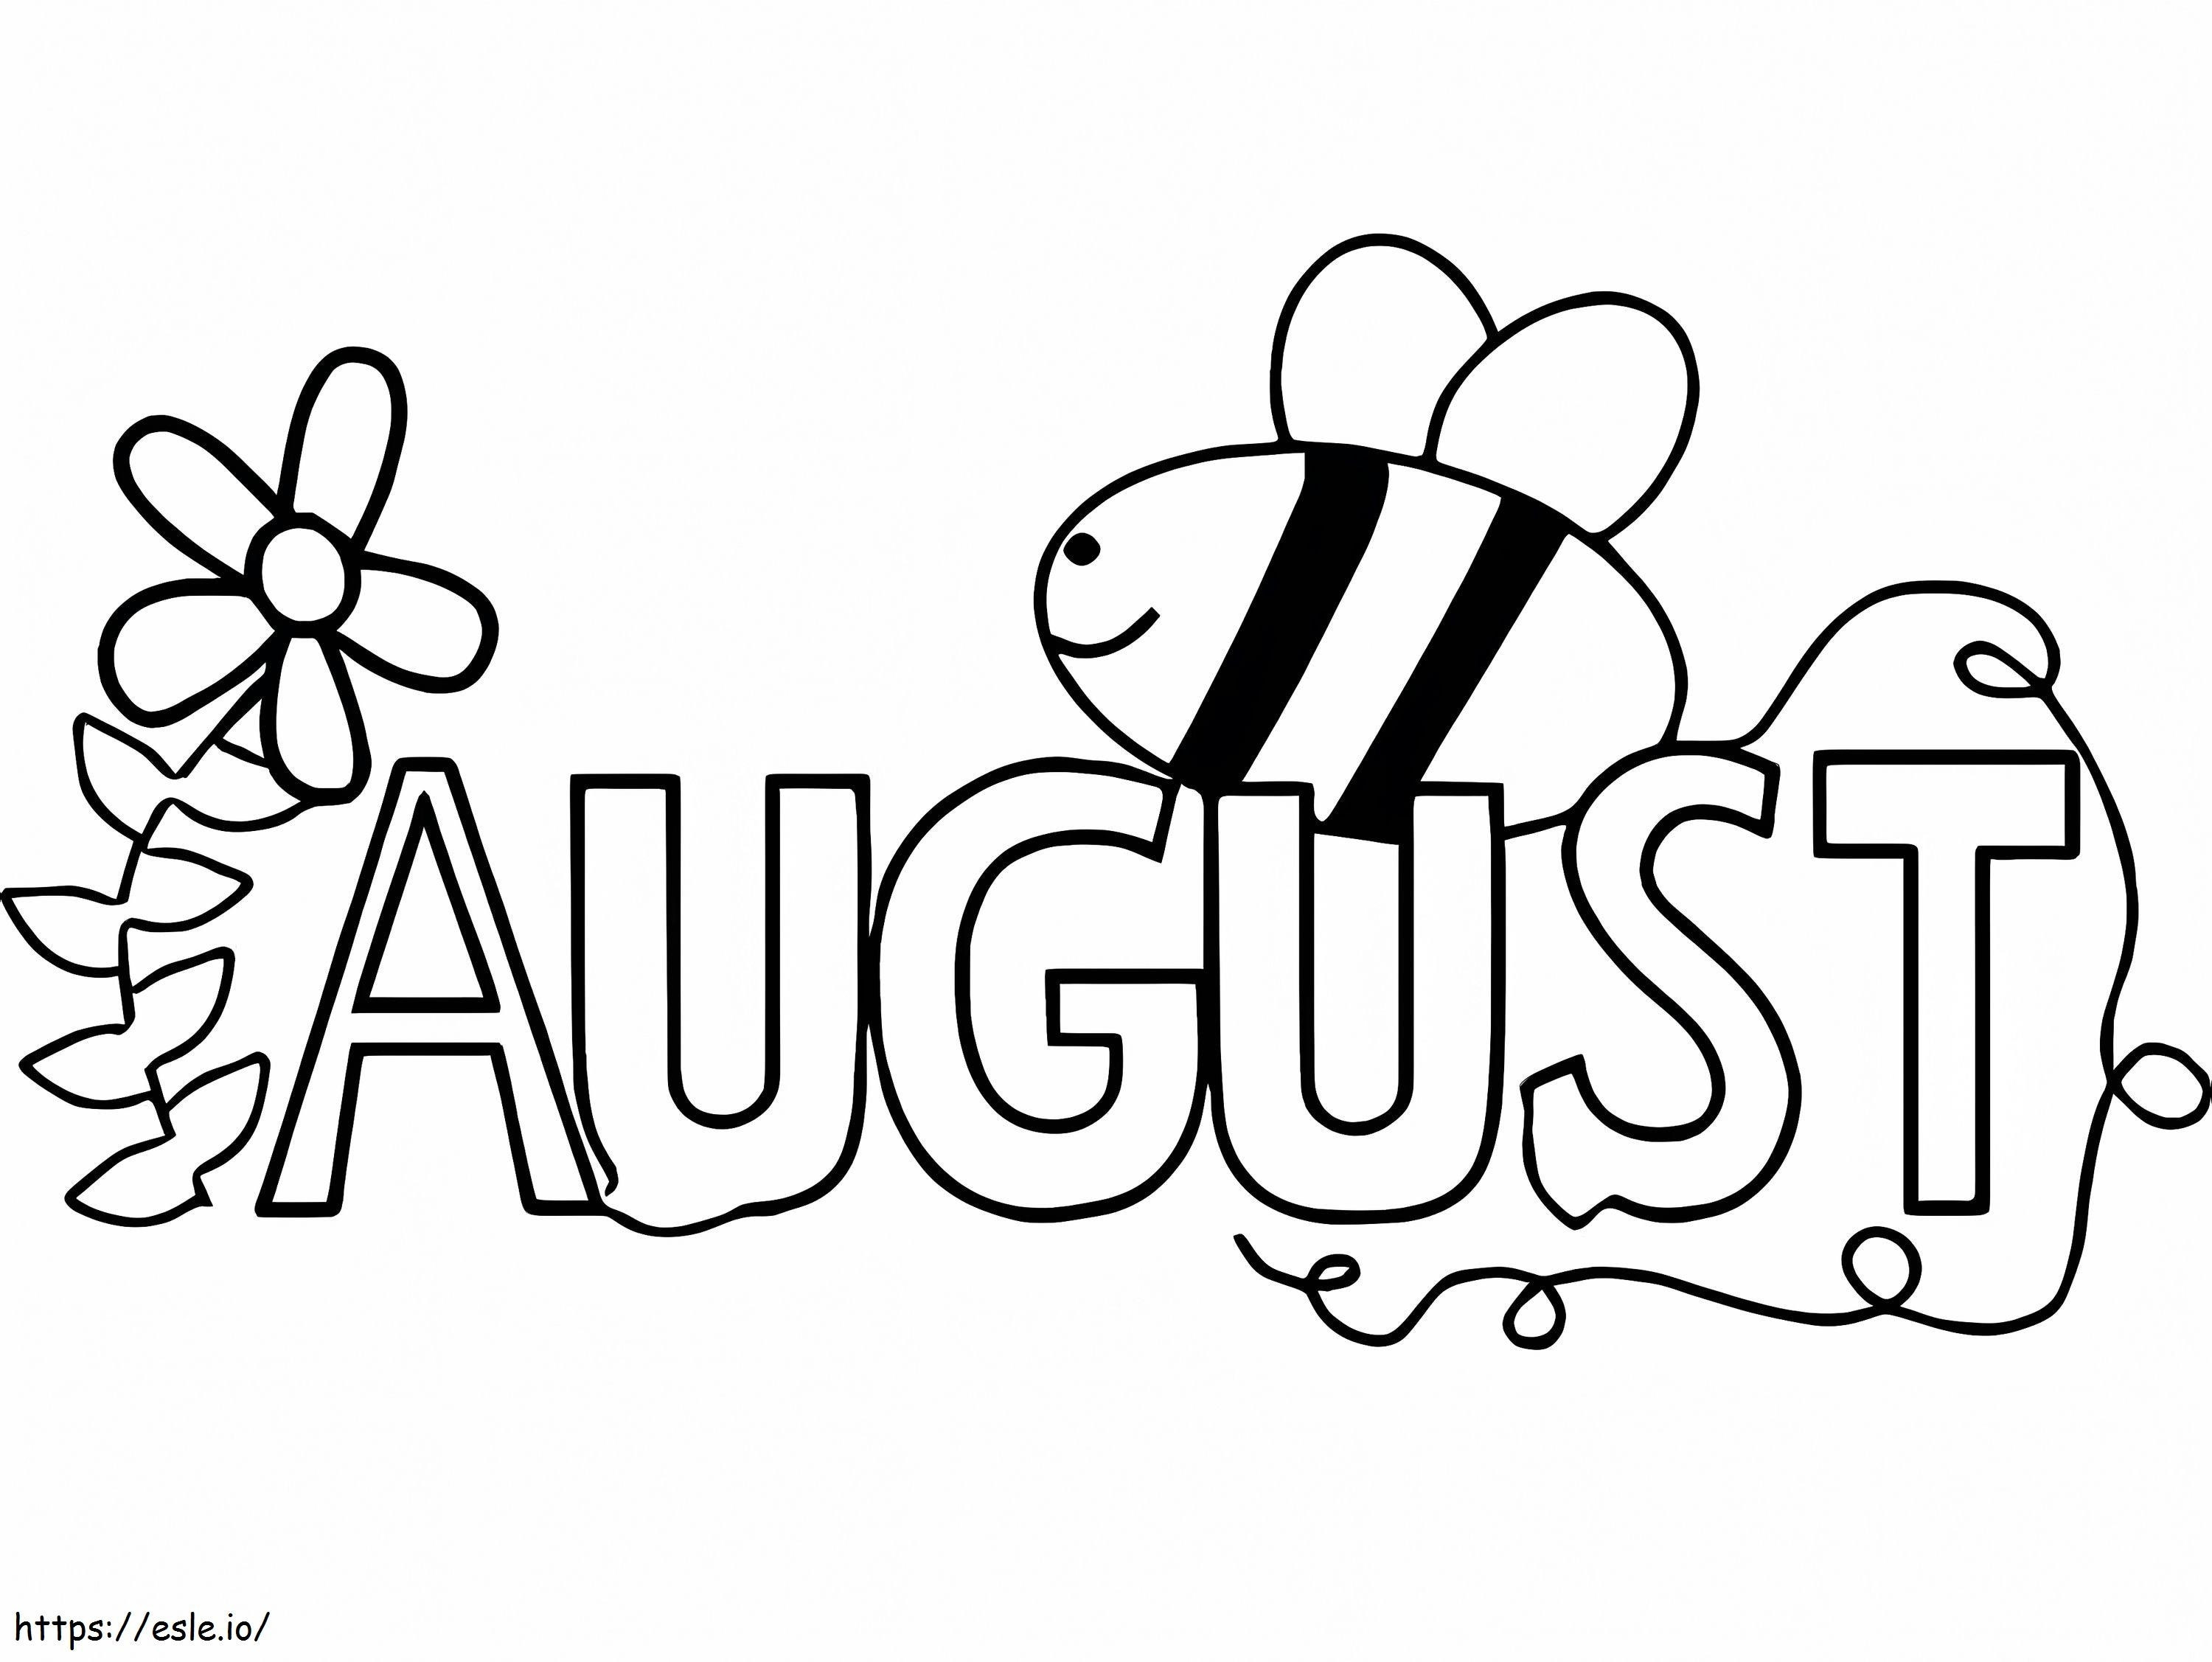 Adorable August coloring page